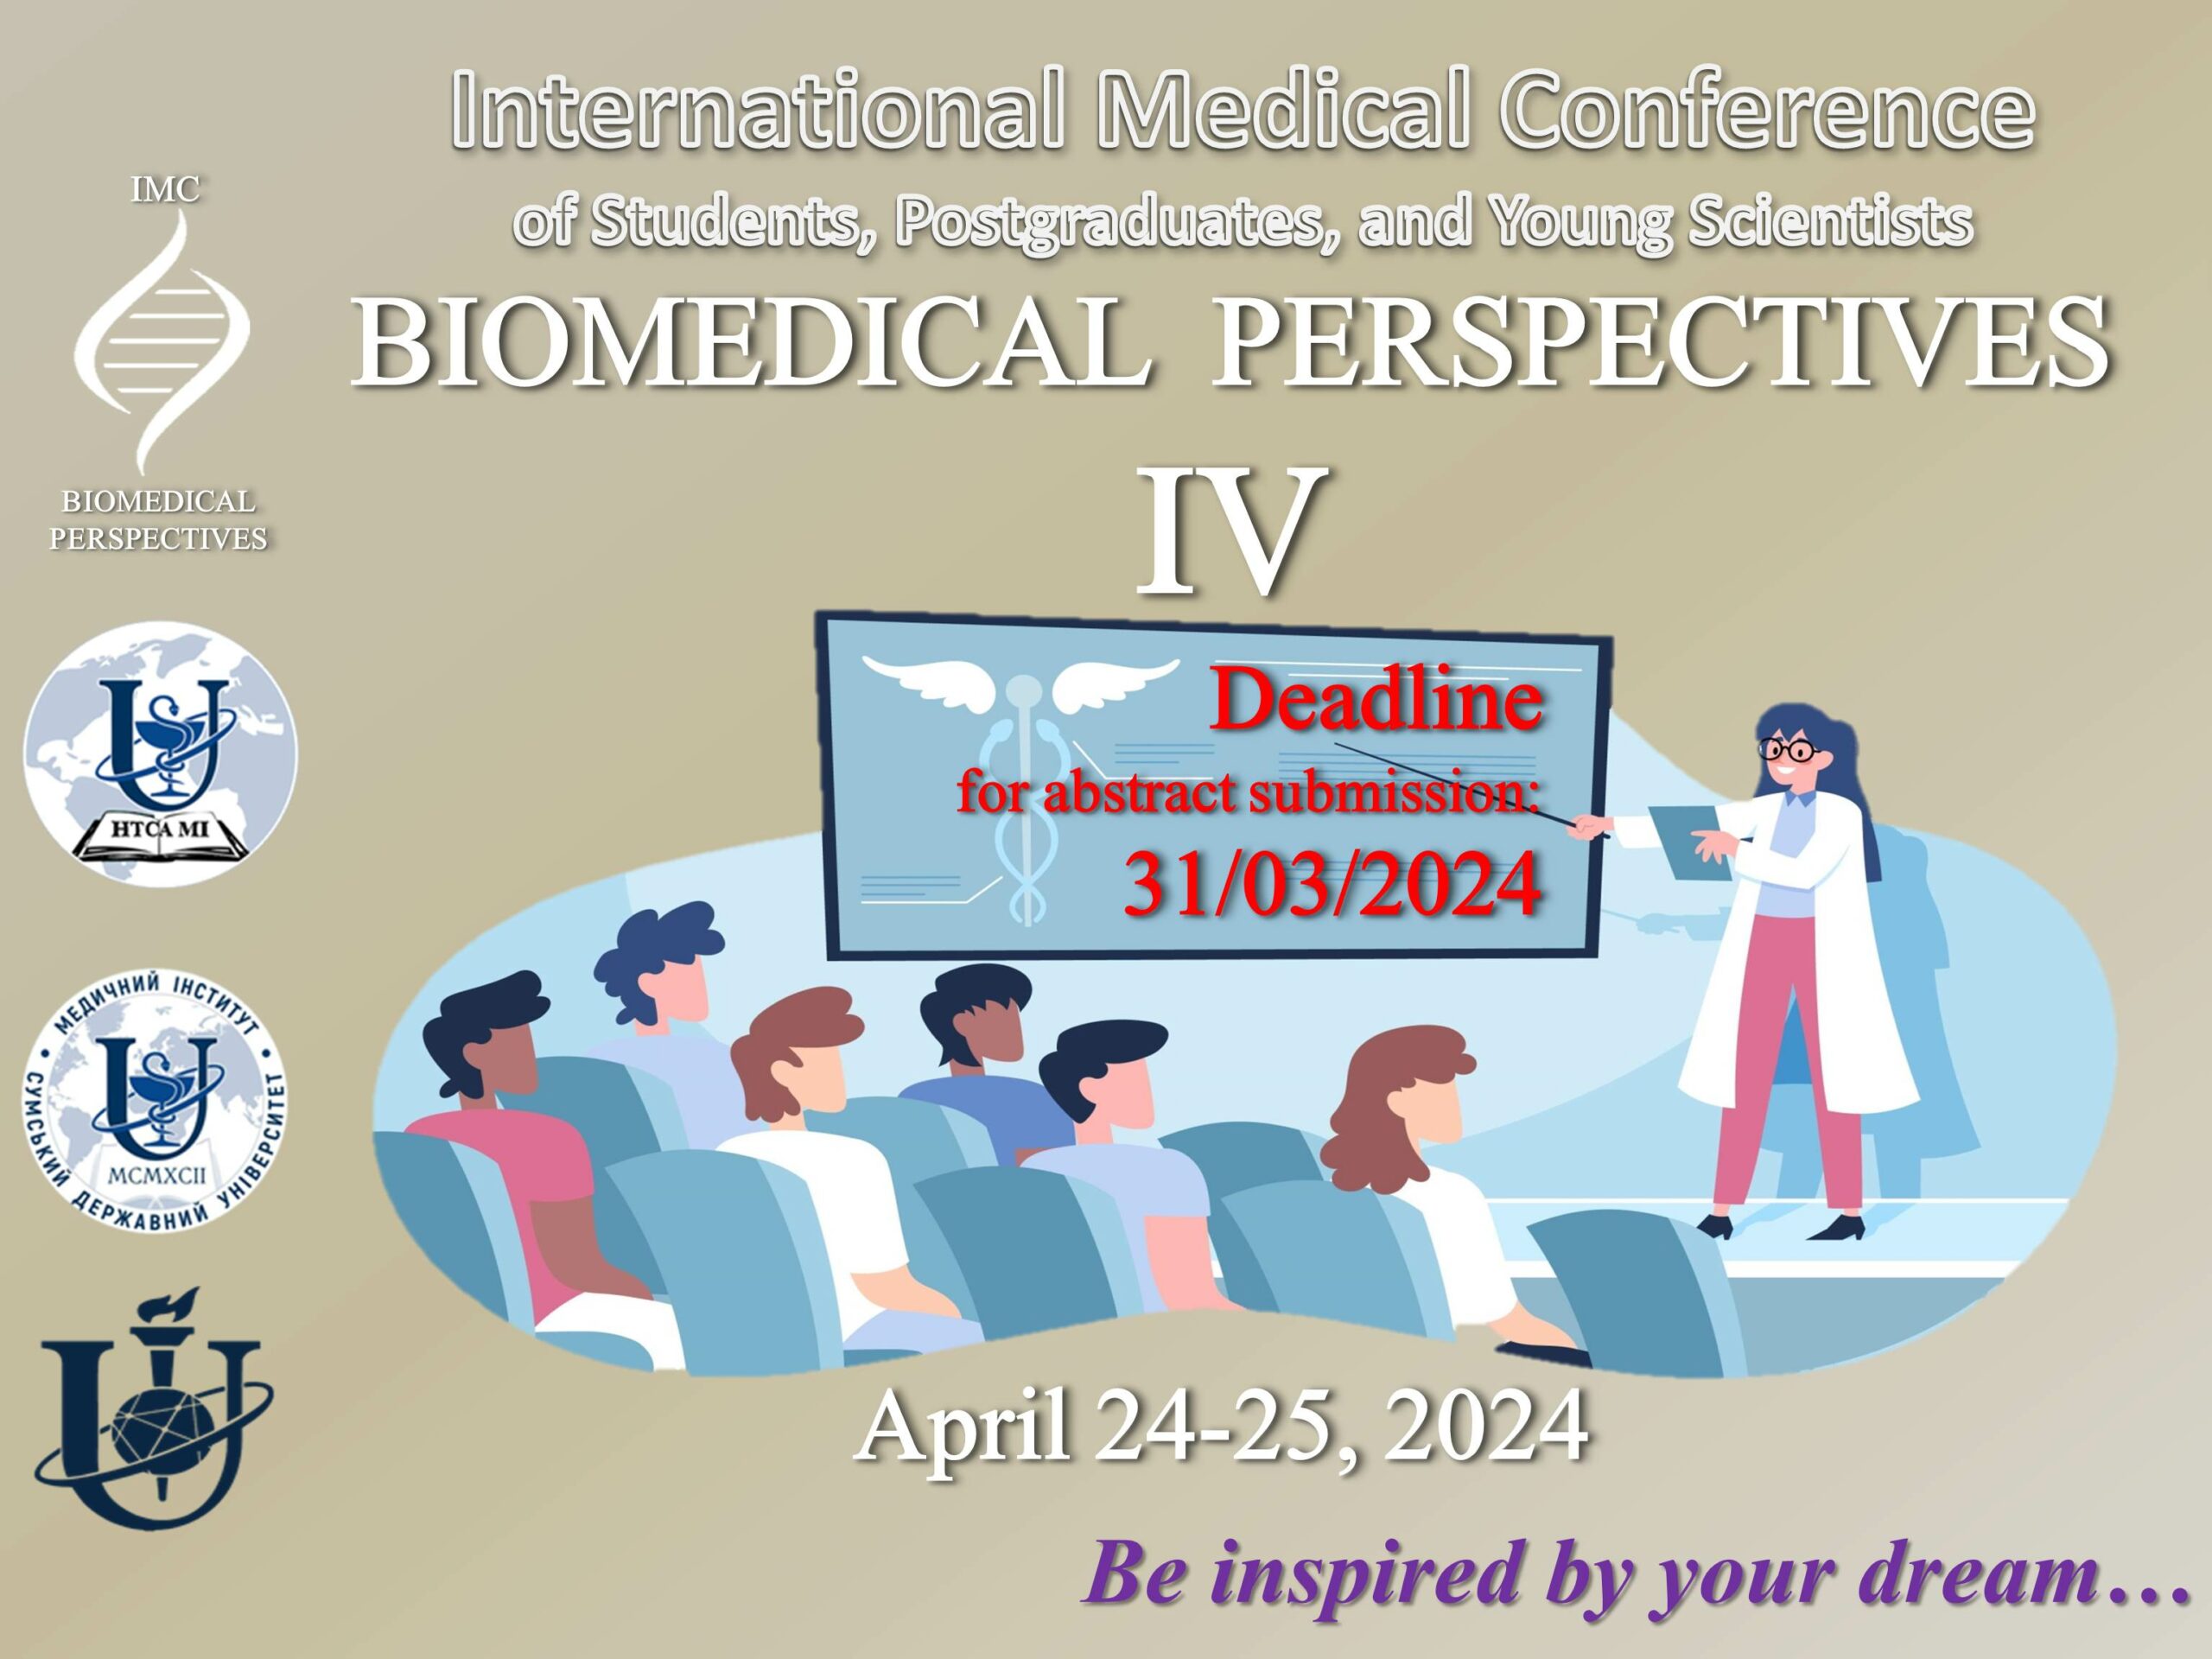 BIOMEDICAL PERSPECTIVES IV